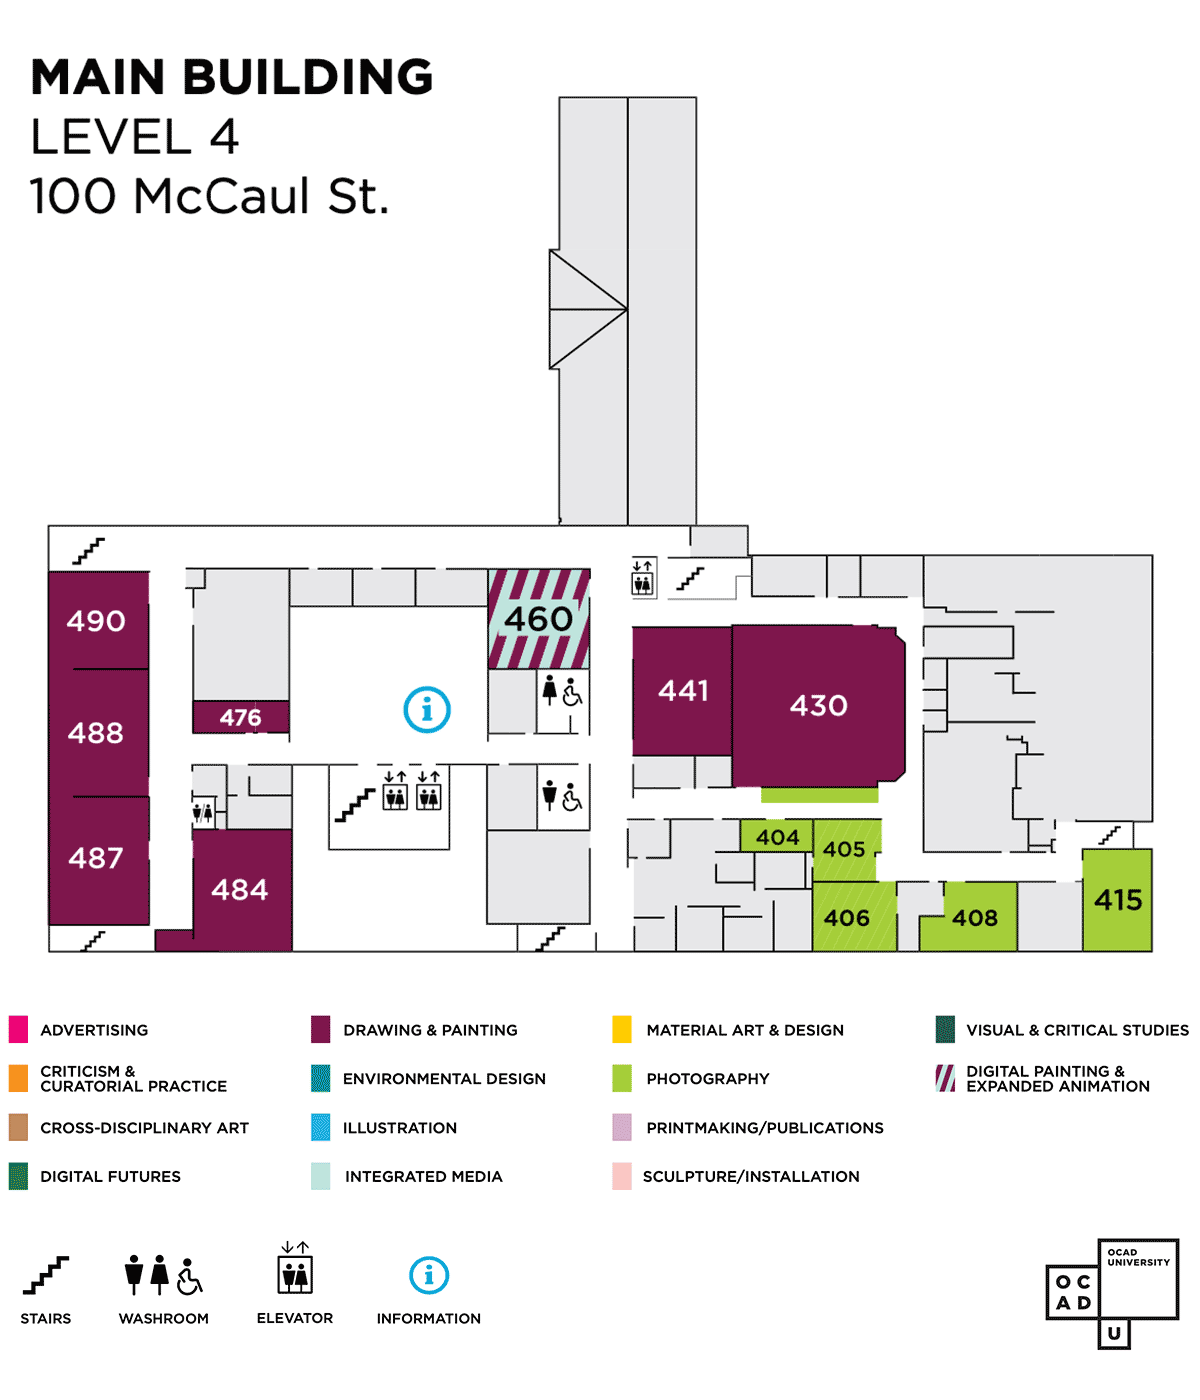 Map of 100 McCaul street level 4. Exhibitions in rooms 404, 405, 406, 408, 415, 430, 441, 460, 476, 484, 487, 488, 490.